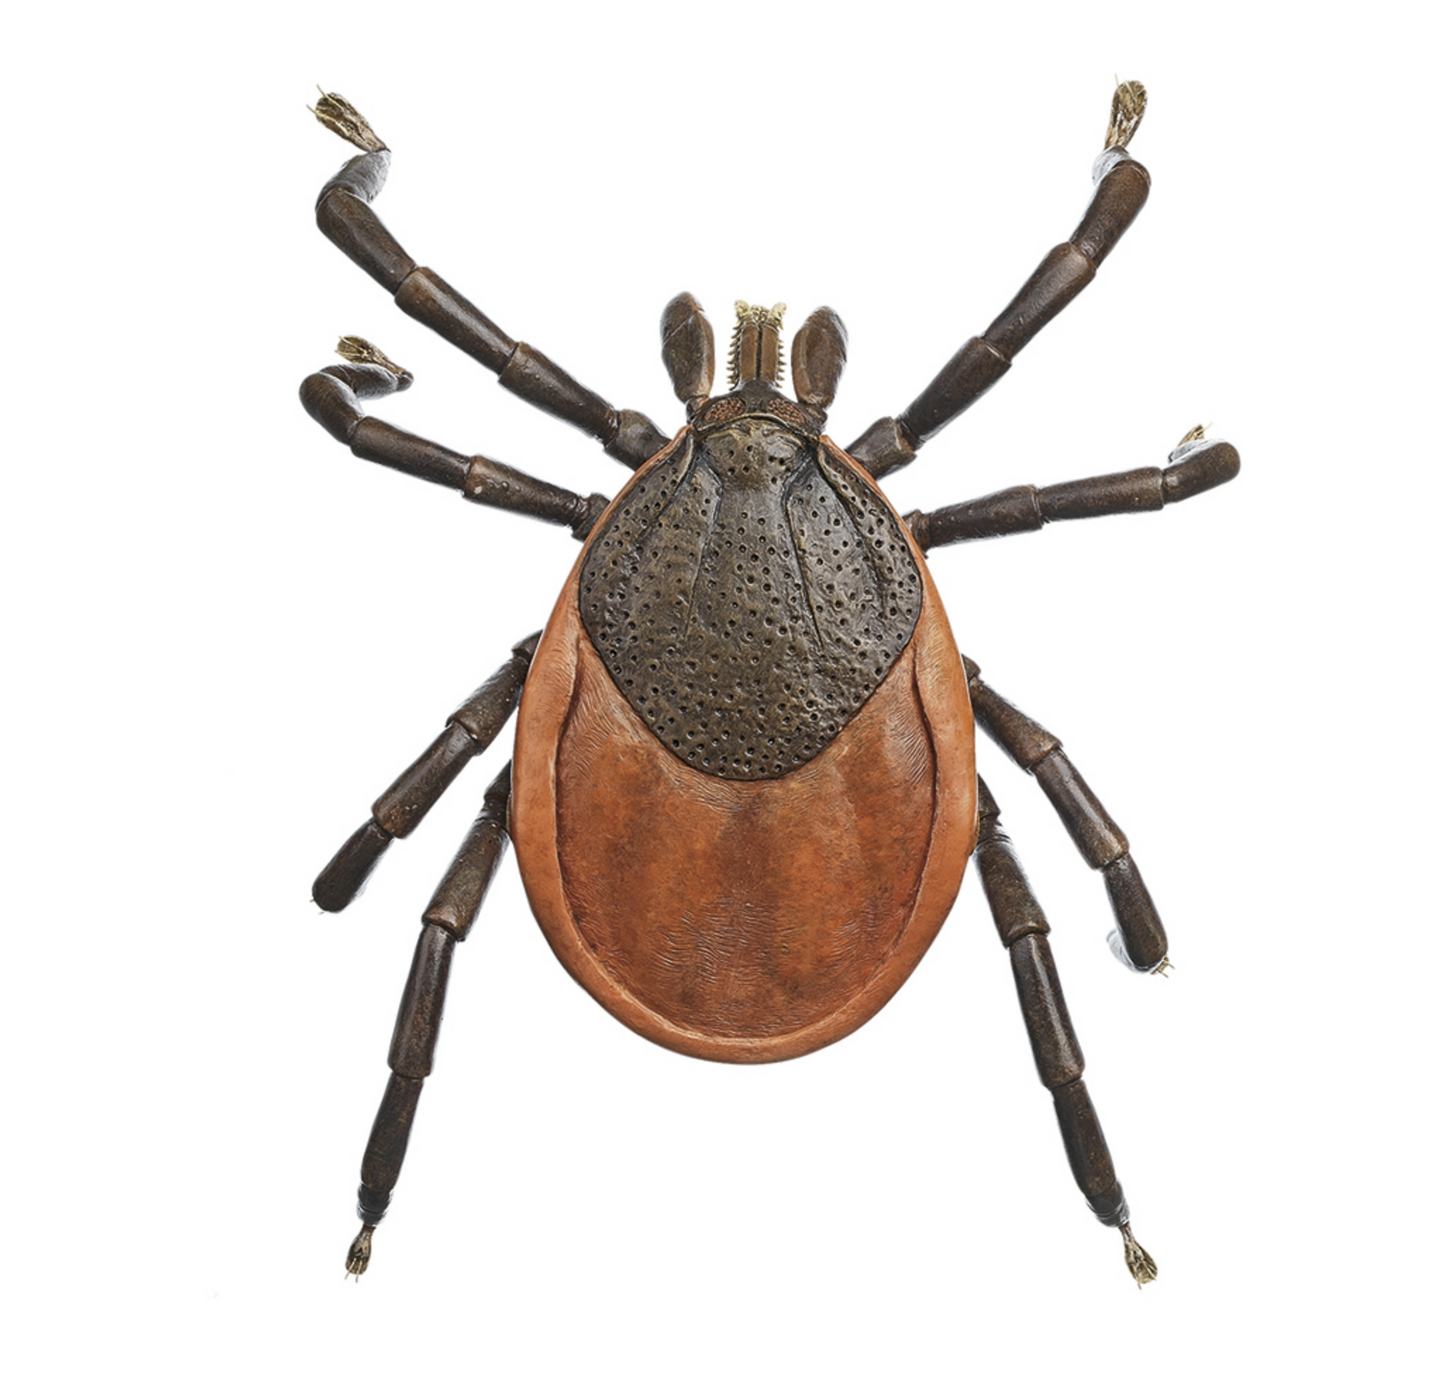 Model of a tick (Ixodes ricinus) in the highest quality and greatly enlarged